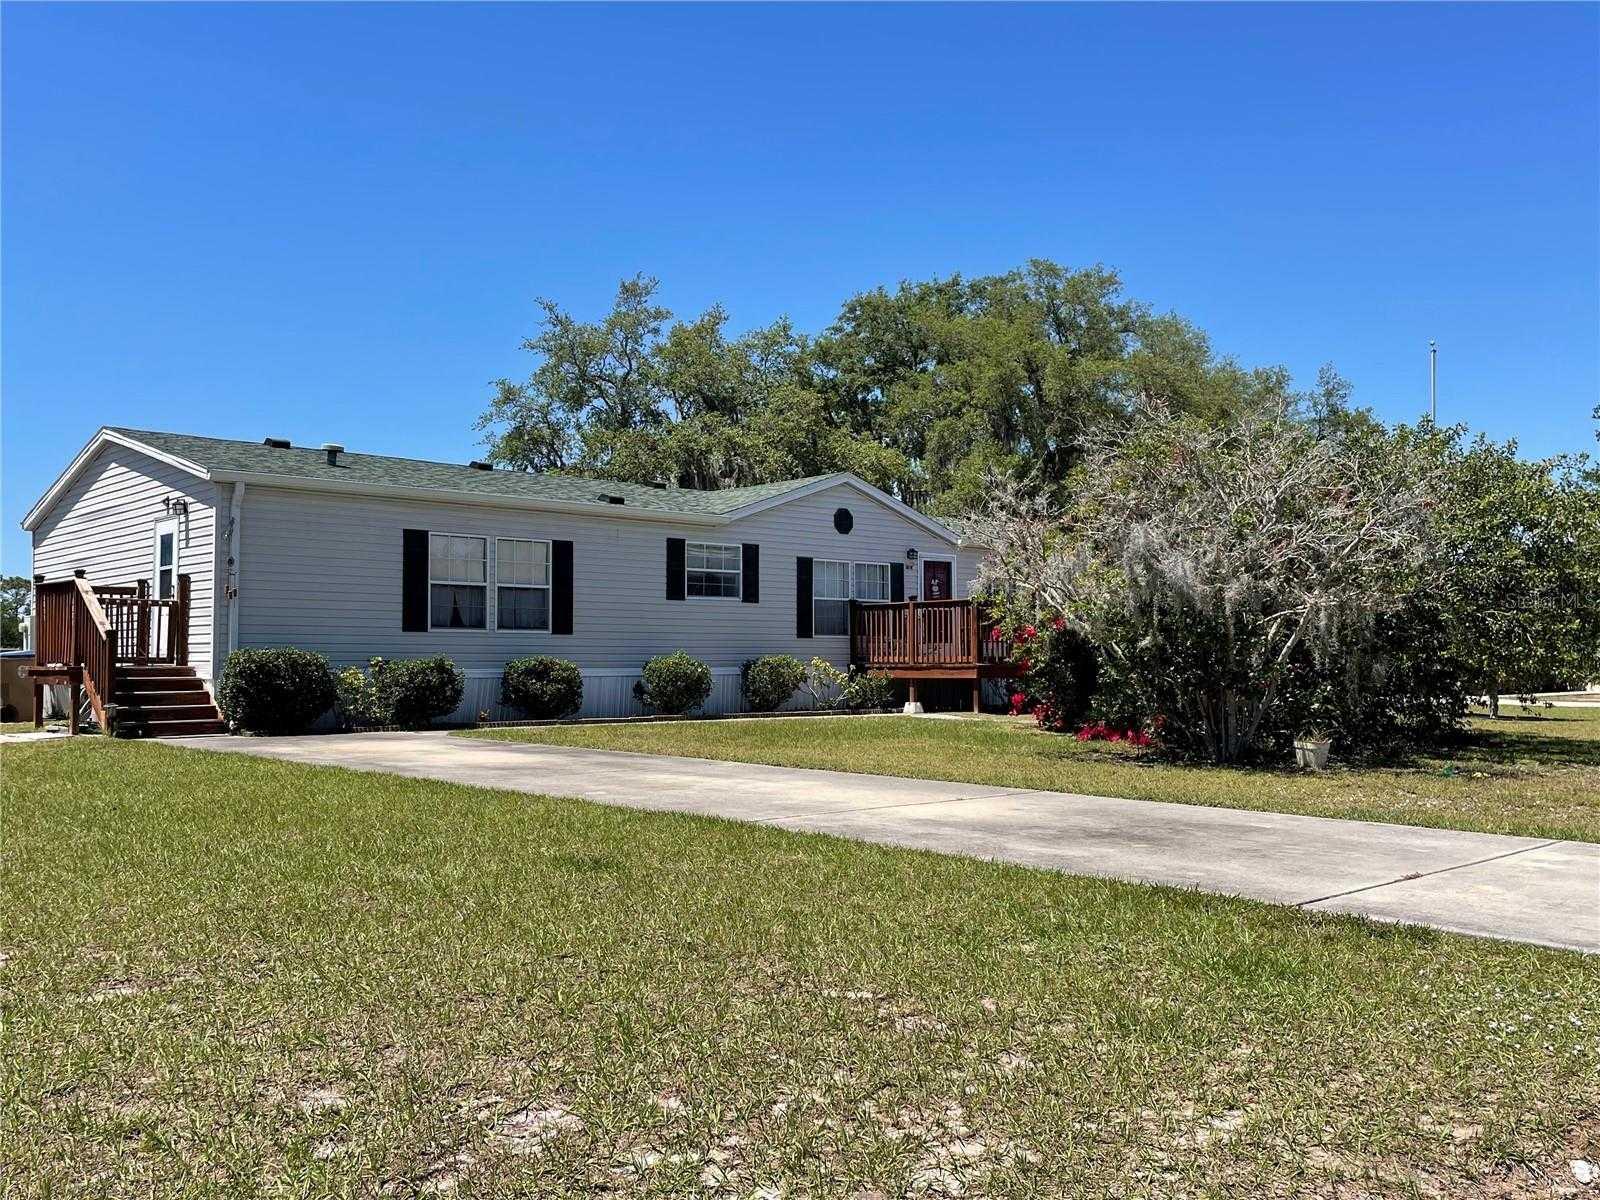 1814 WINCHESTER, SAINT CLOUD, Manufactured Home - Post 1977,  for sale, The Mount Dora Group 